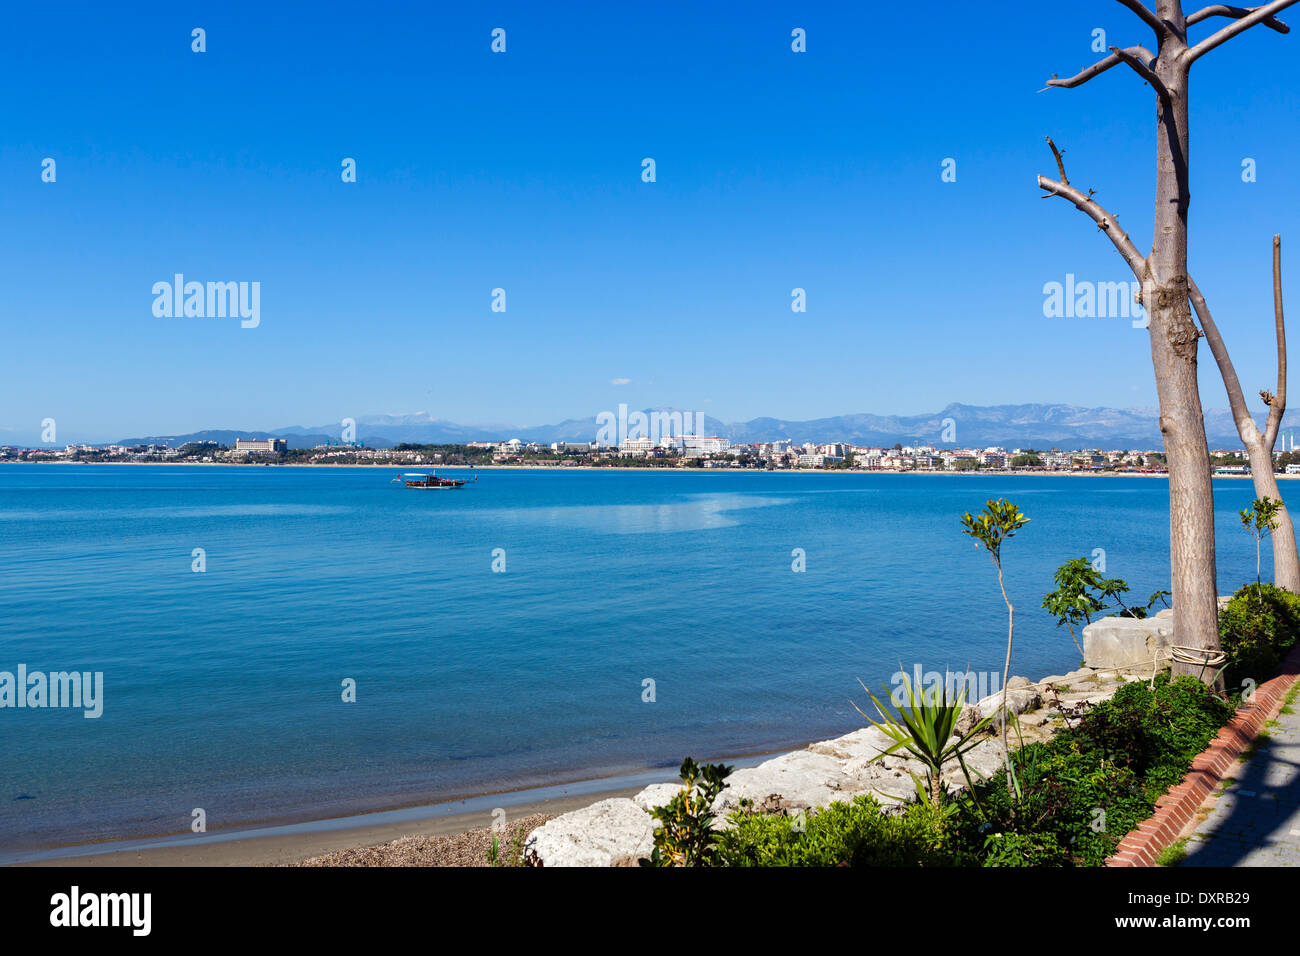 Side Turkey Beach High Resolution Stock Photography and Images - Alamy